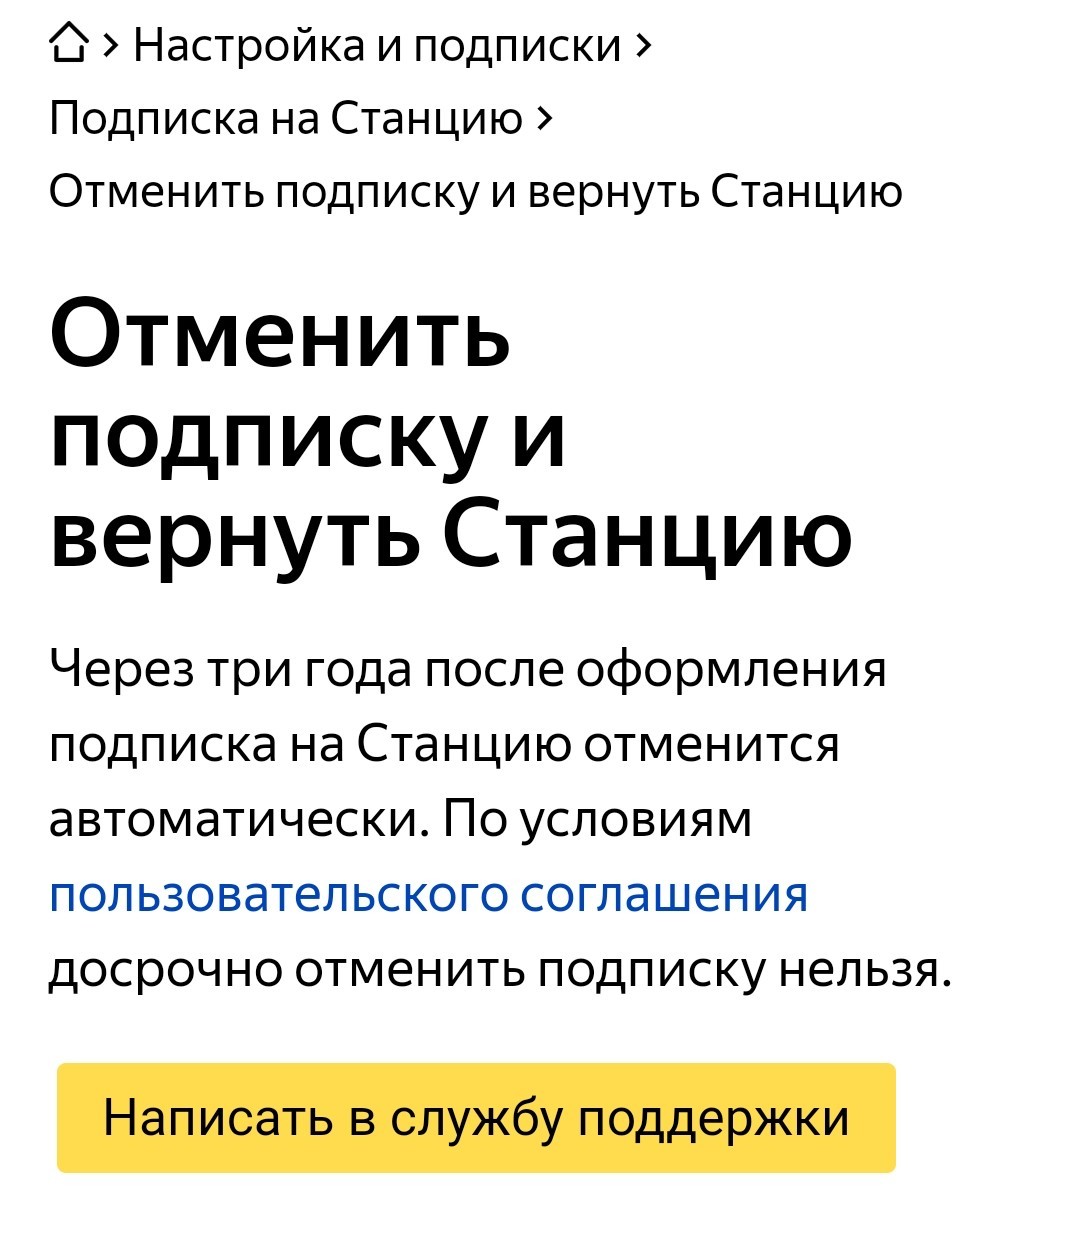 Yandex.Station by subscription. Problems with delivery. - My, No rating, Yandex., Yandex Station, Delivery, Support service, Yandex Music, Longpost